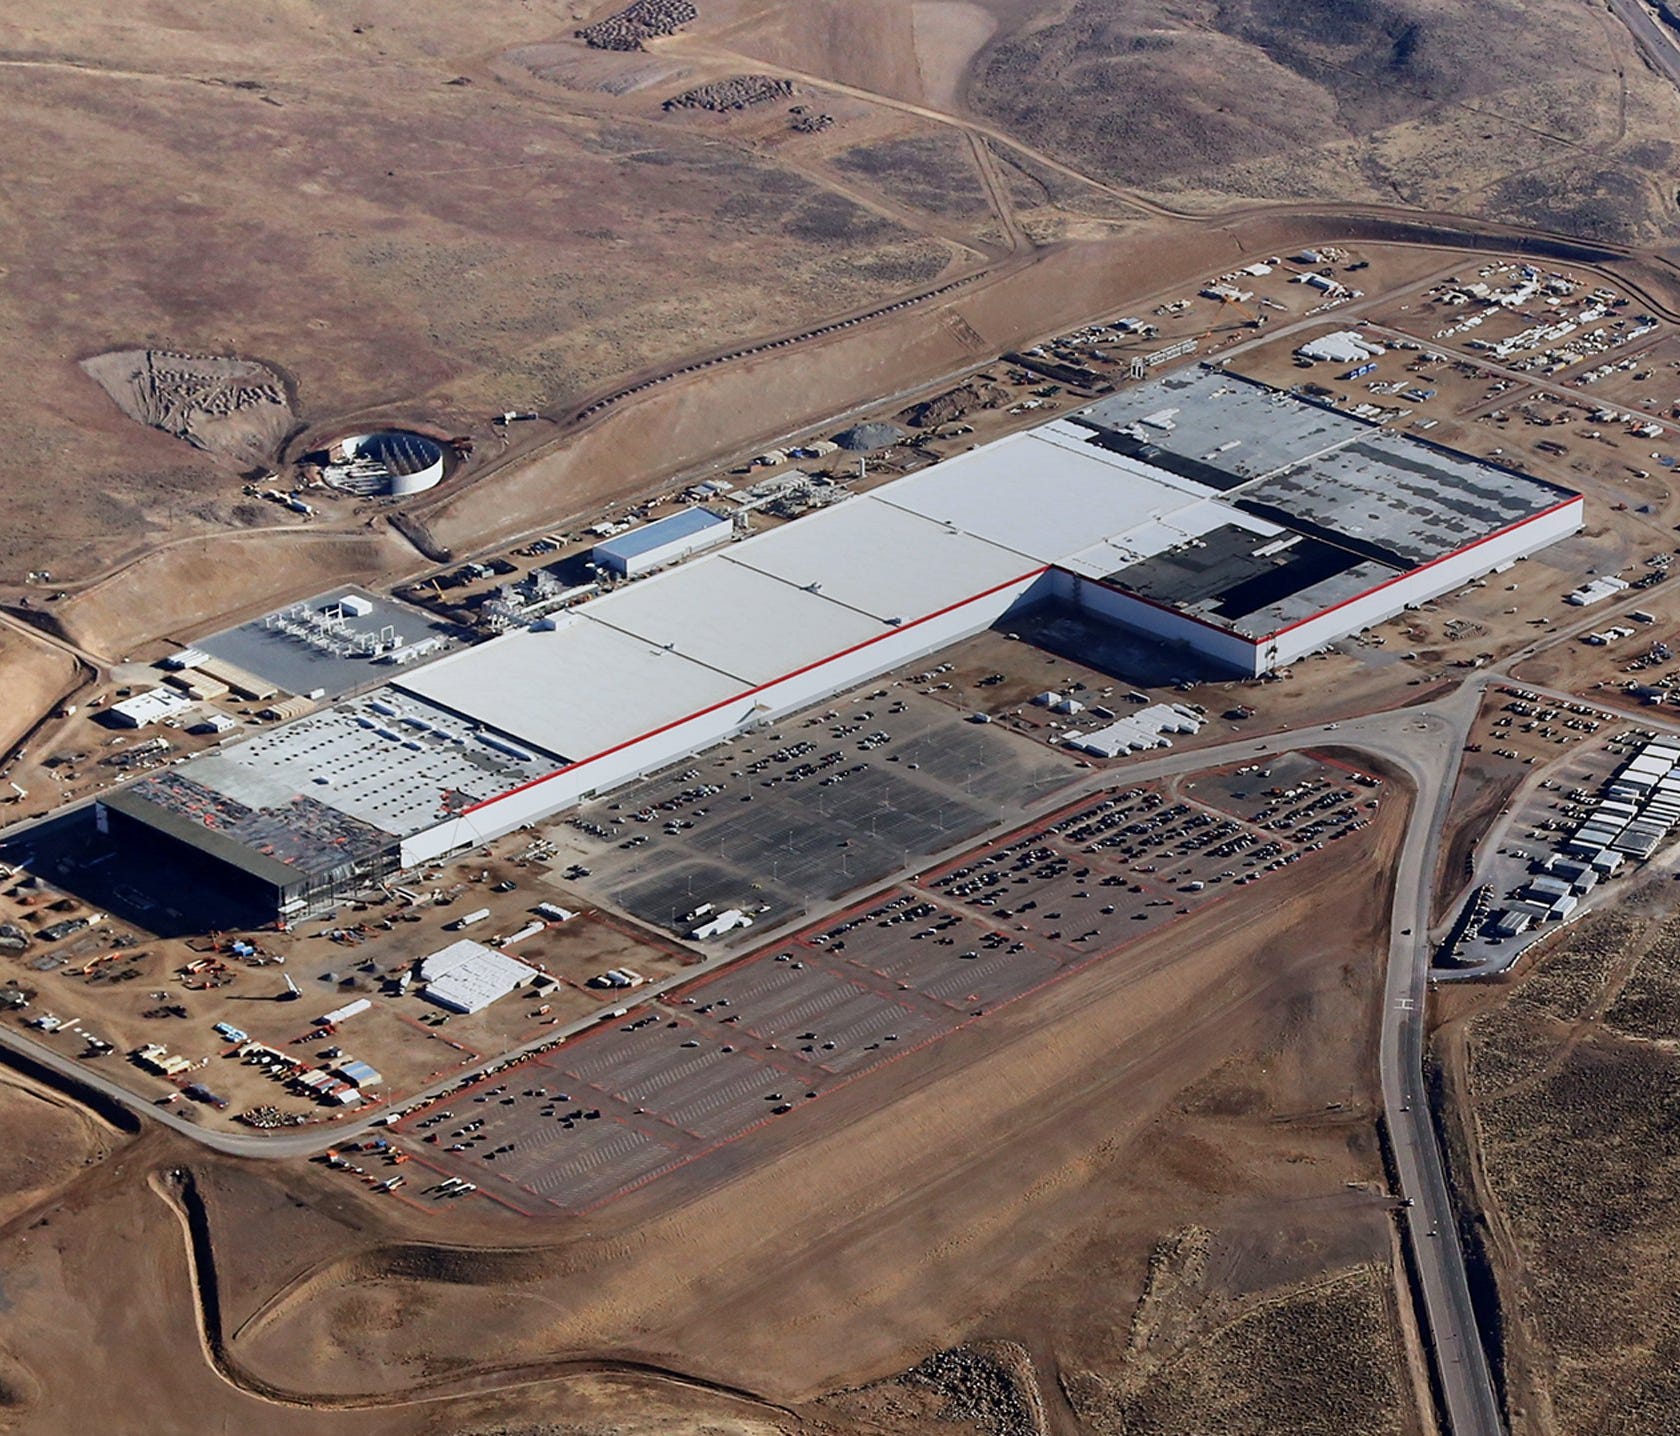 A handout photo made available by Tesla Motors on July 3, 2017 shows an aerial view of Tesla Gigafactory in Sparks, Nevada.